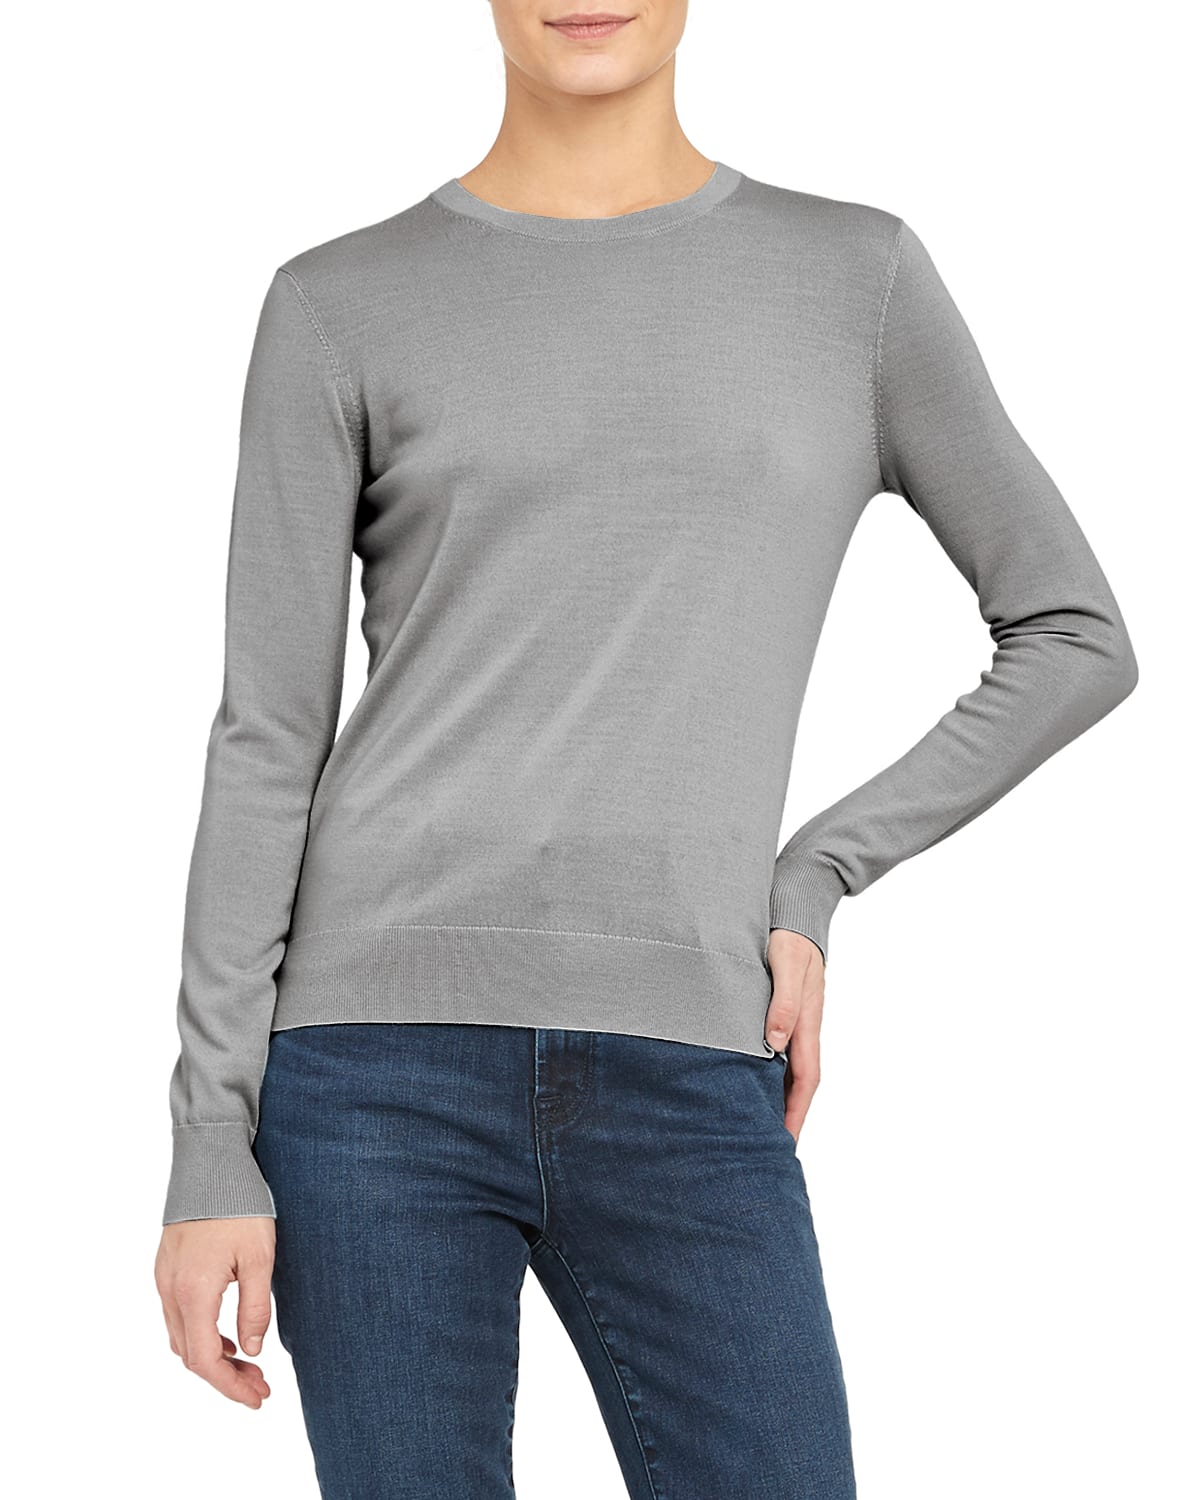 THEORY REGAL WOOL CREWNECK PULLOVER,PROD235050018